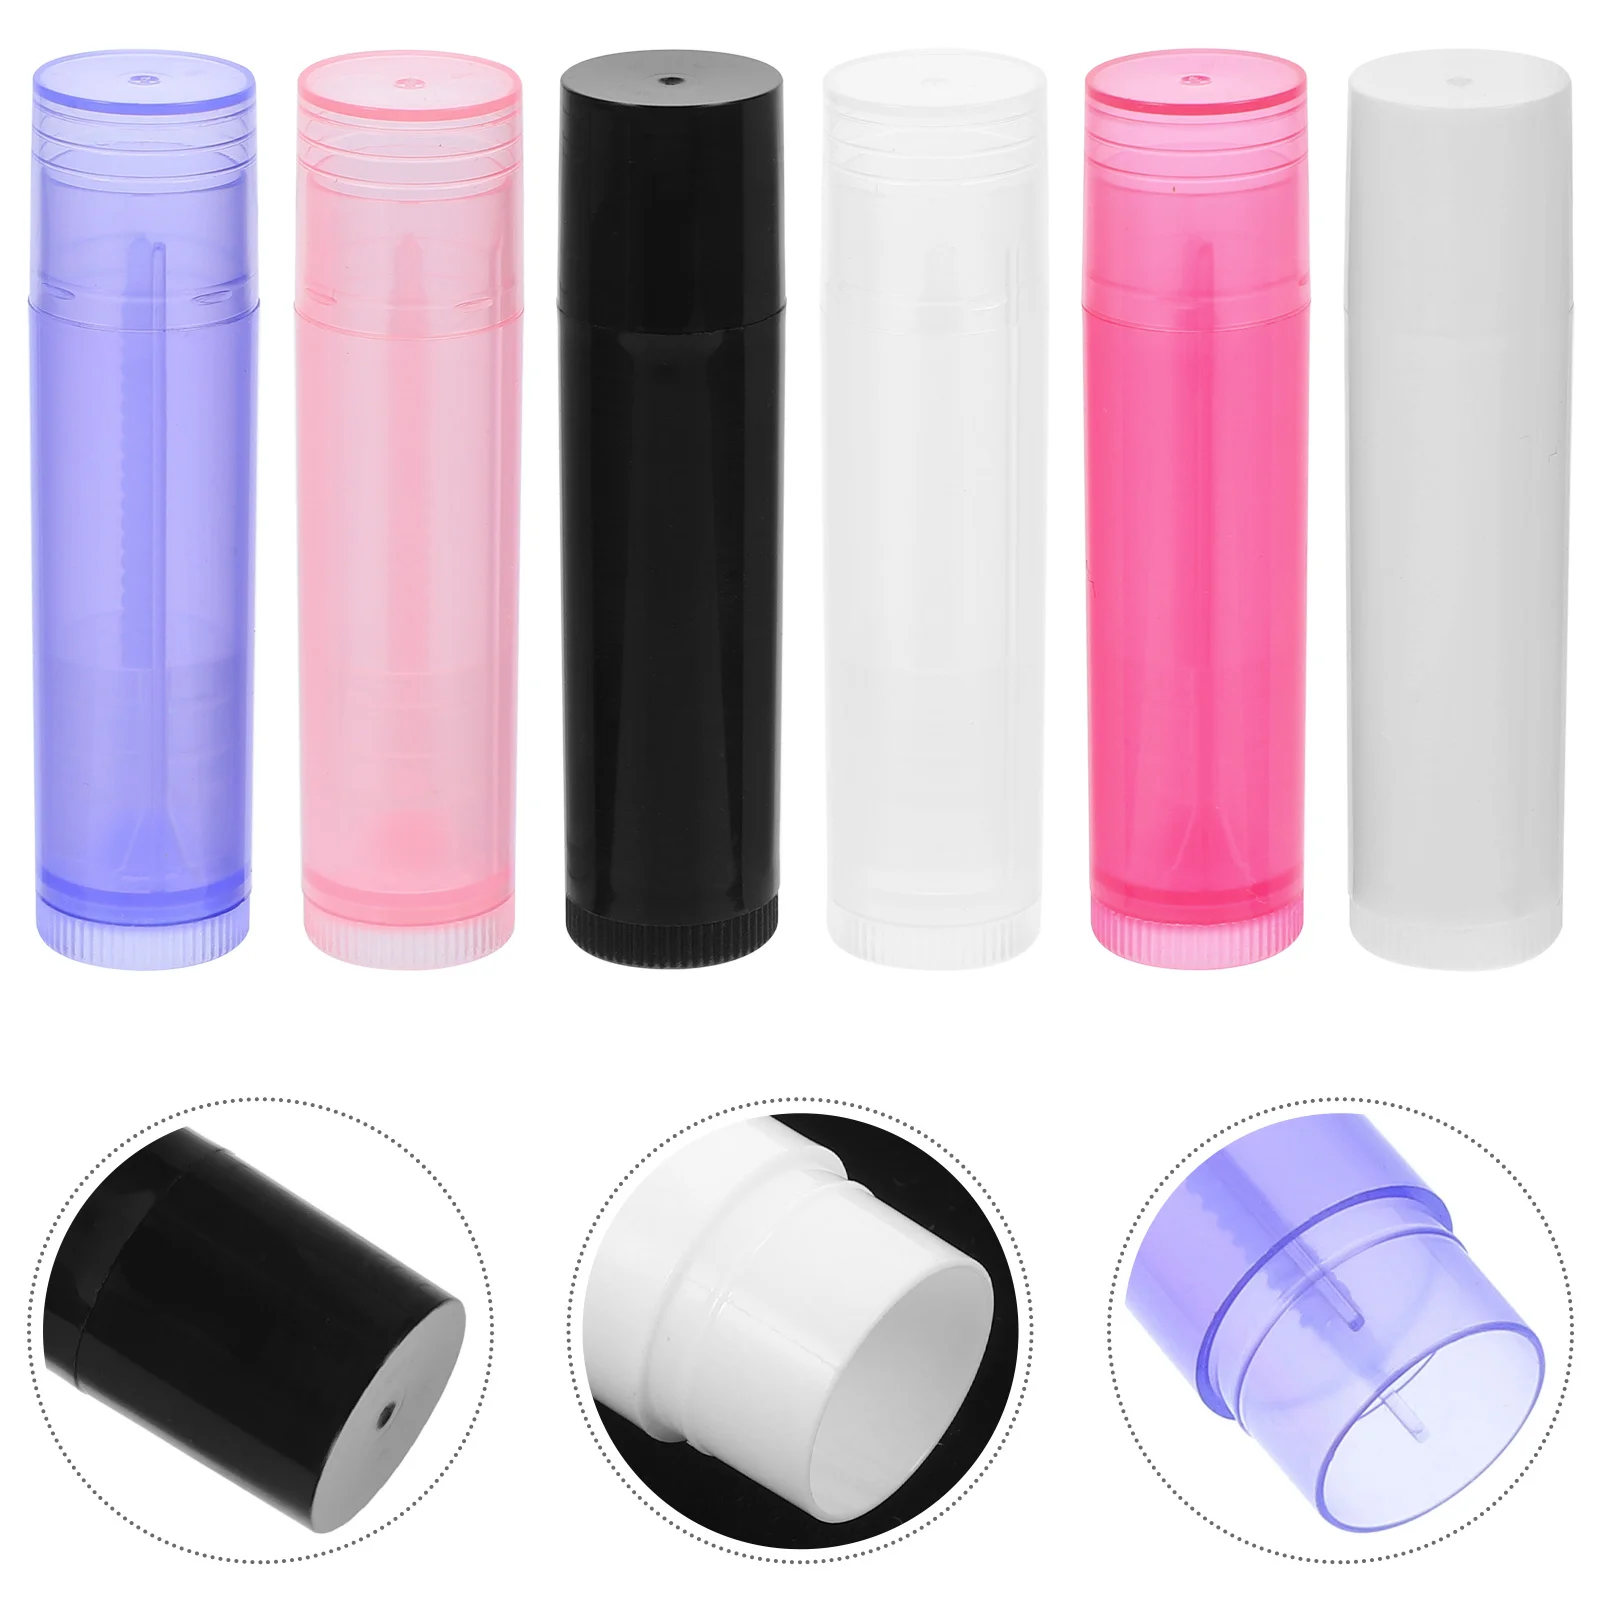 

60 Pcs Toiletry Containers Lipstick Tube Refillable Tubes Gloss Bottles Balm DIY Empty Plastic Holder Balms